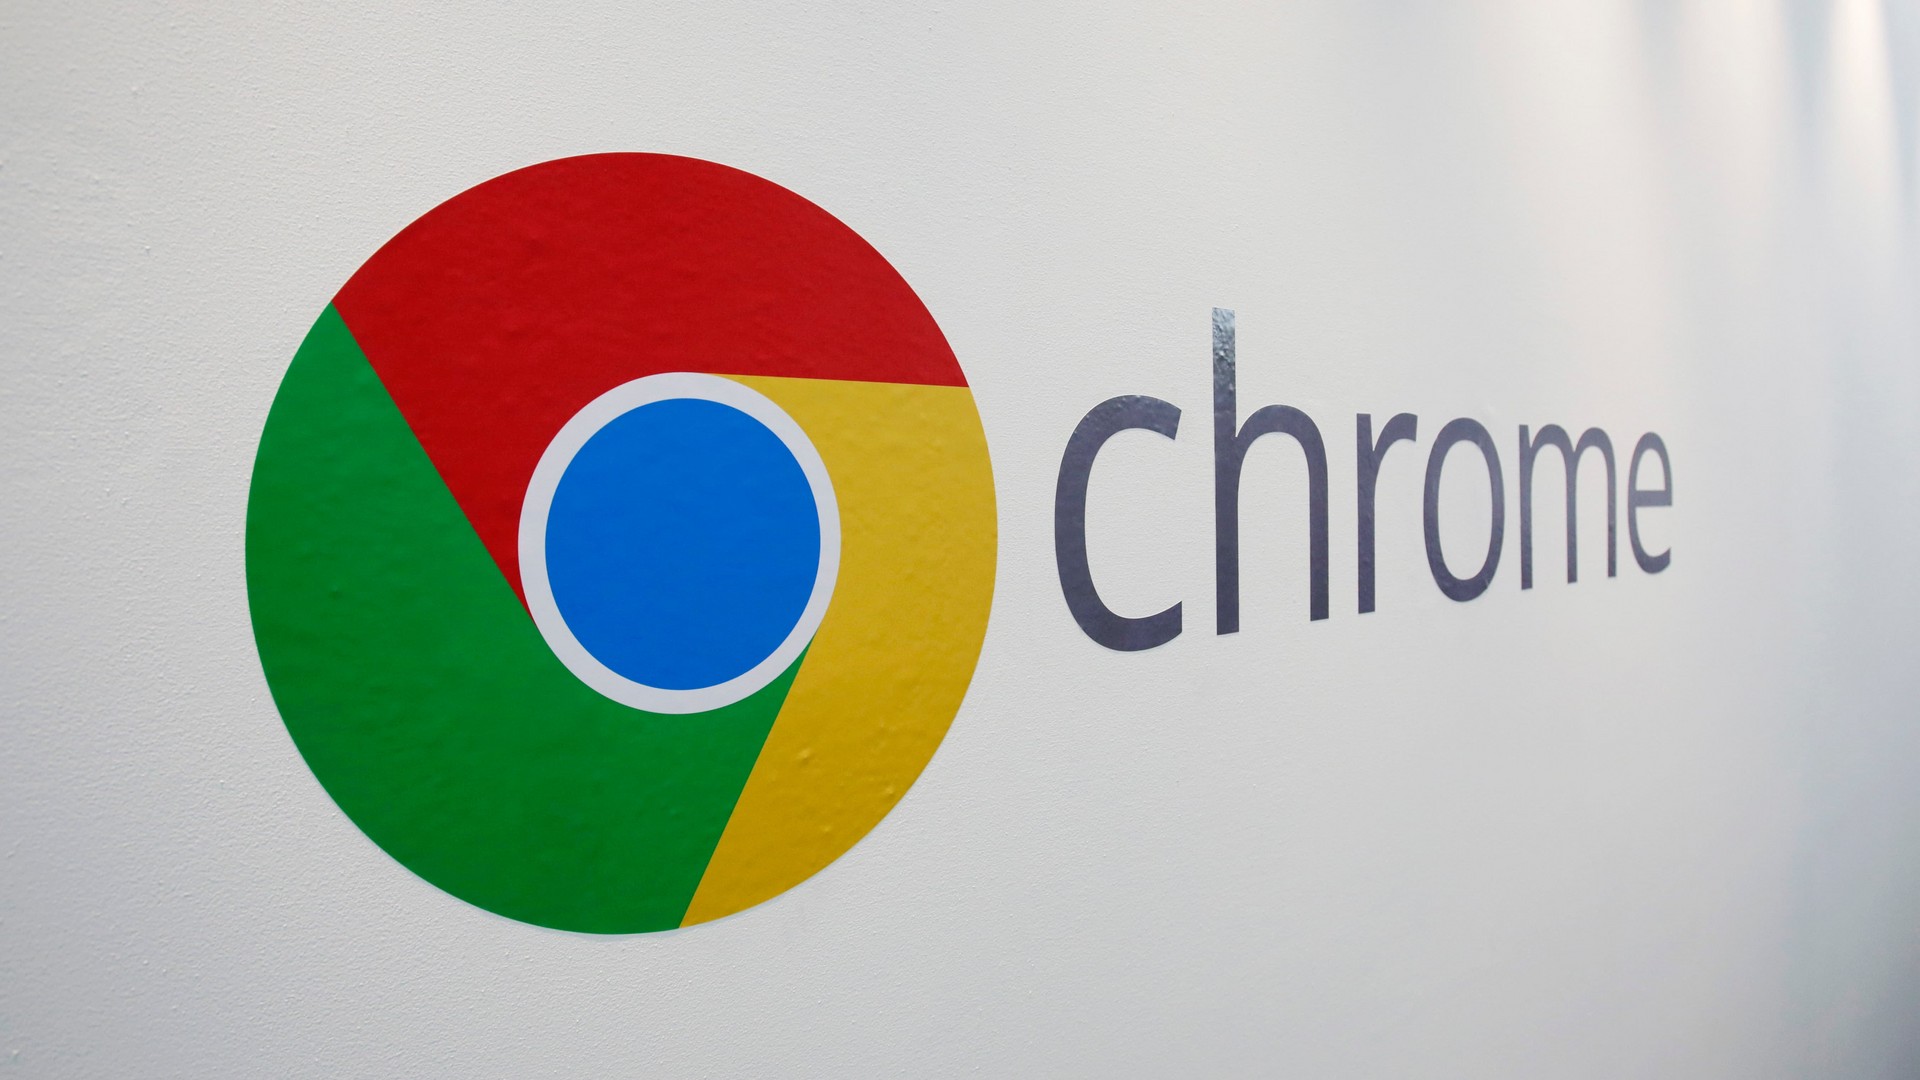 Chrome for Android will now ask for identification in the incognito tab